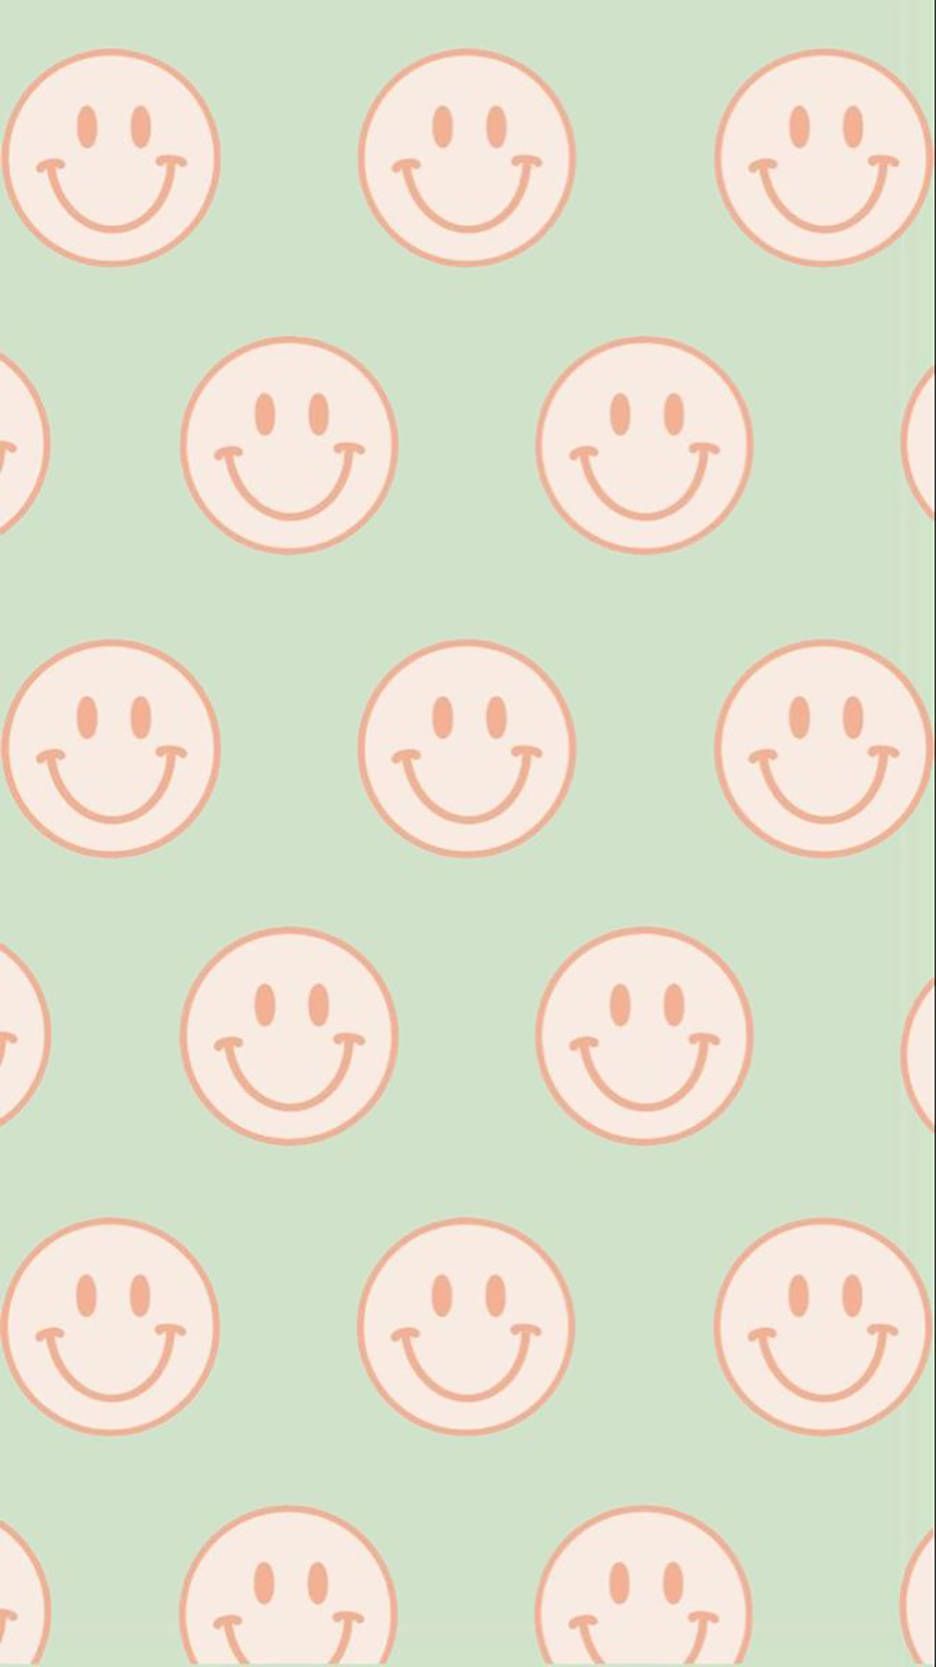 A pattern of smiling faces on green background - Smiley